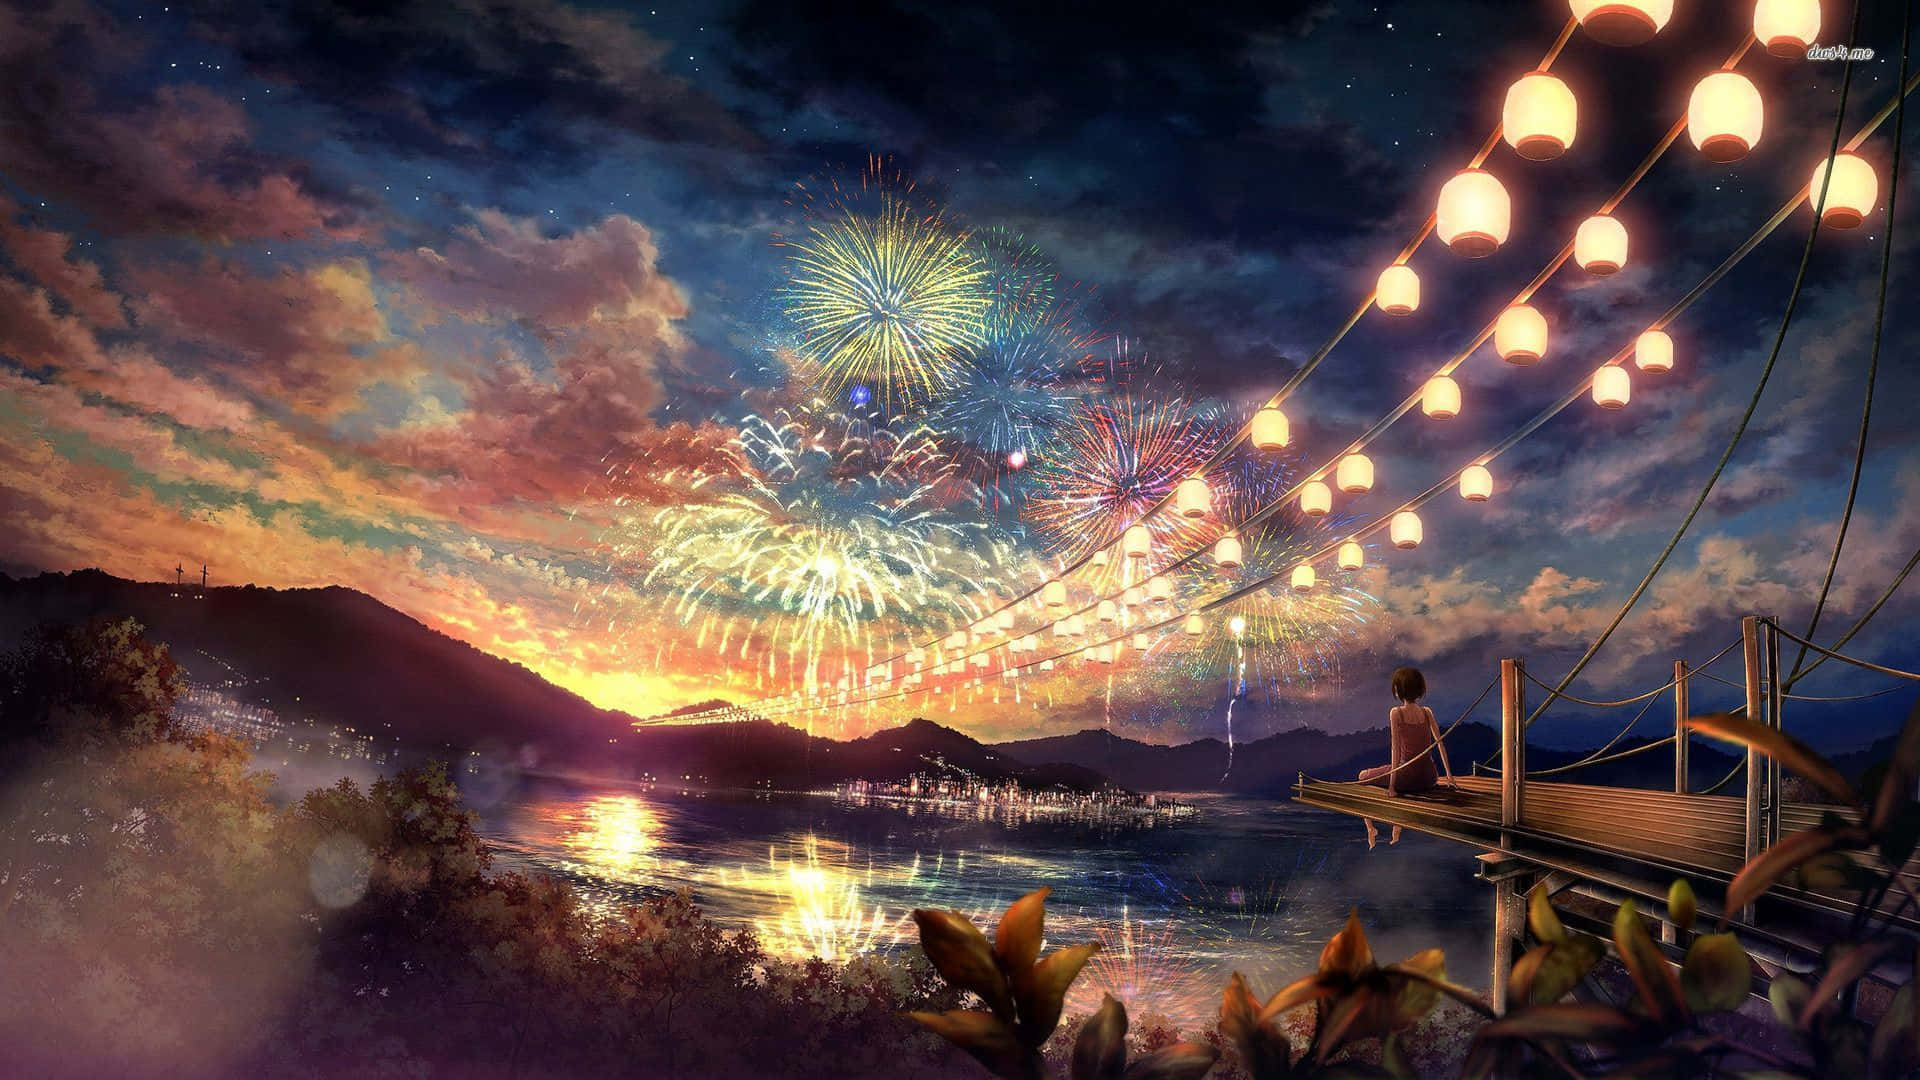 Animated Girl Watching Fireworks Display Picture